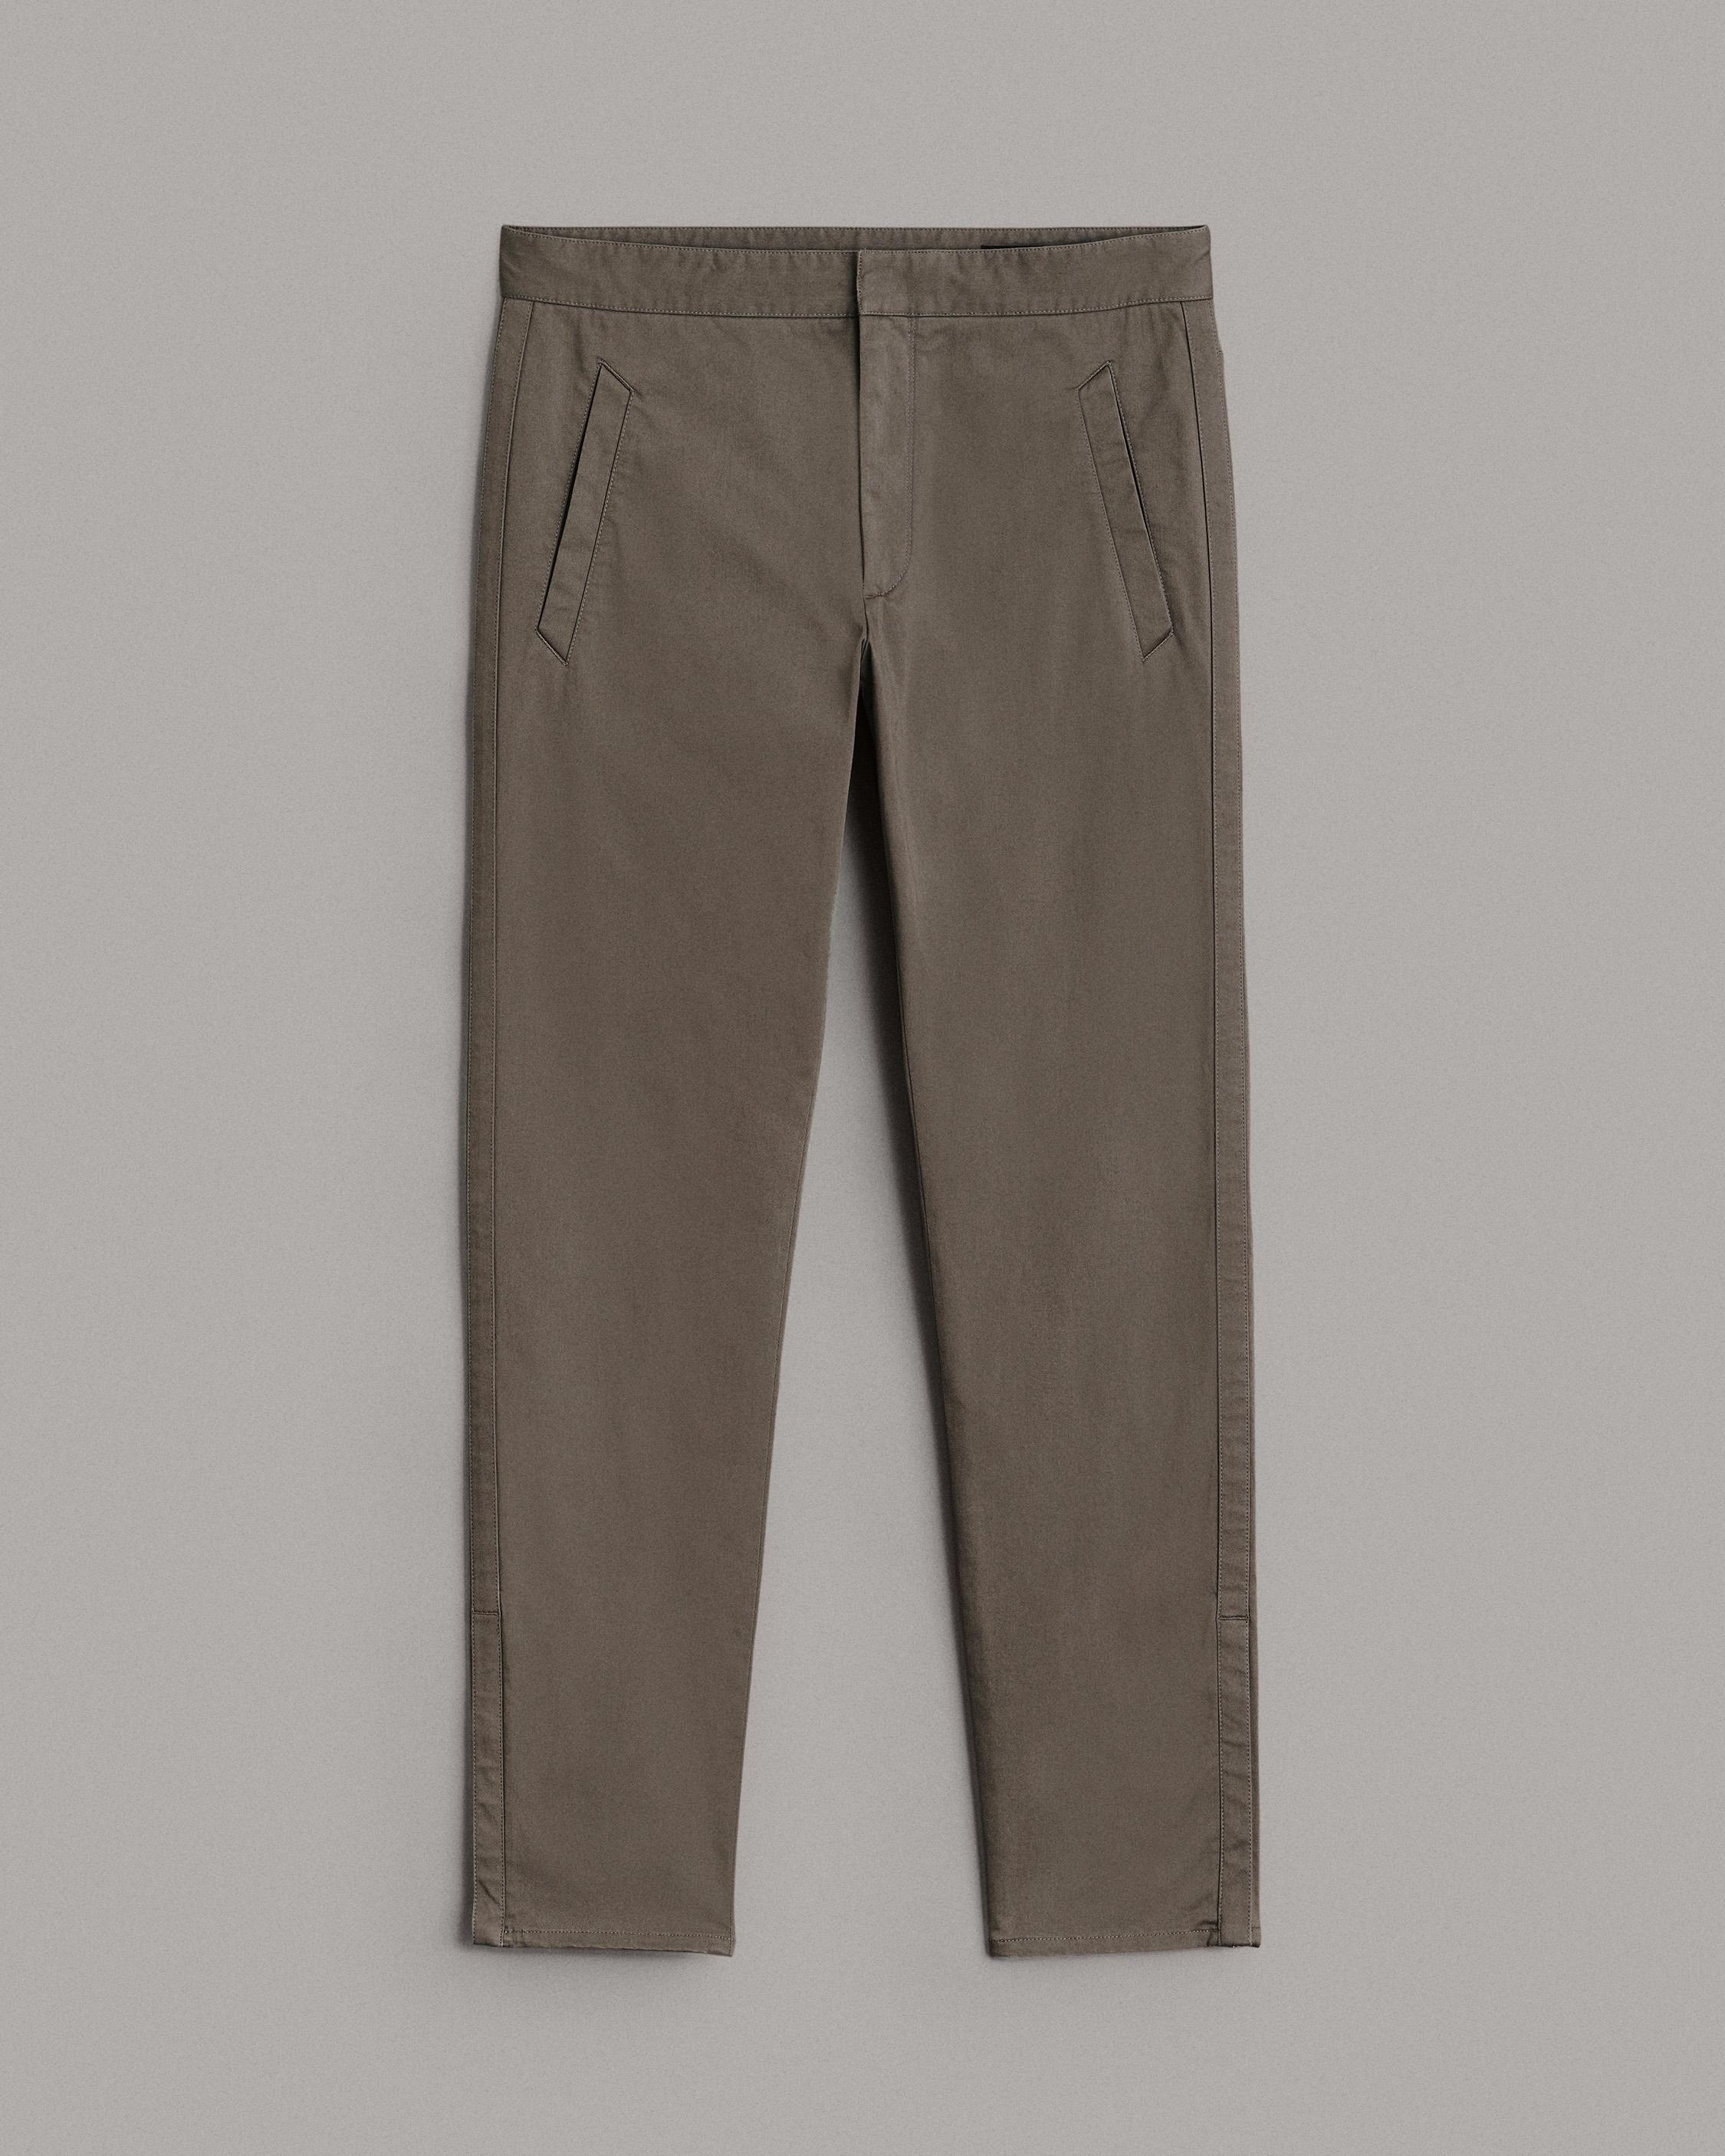 Zander Cotton Pant
Relaxed Fit Pant - 1